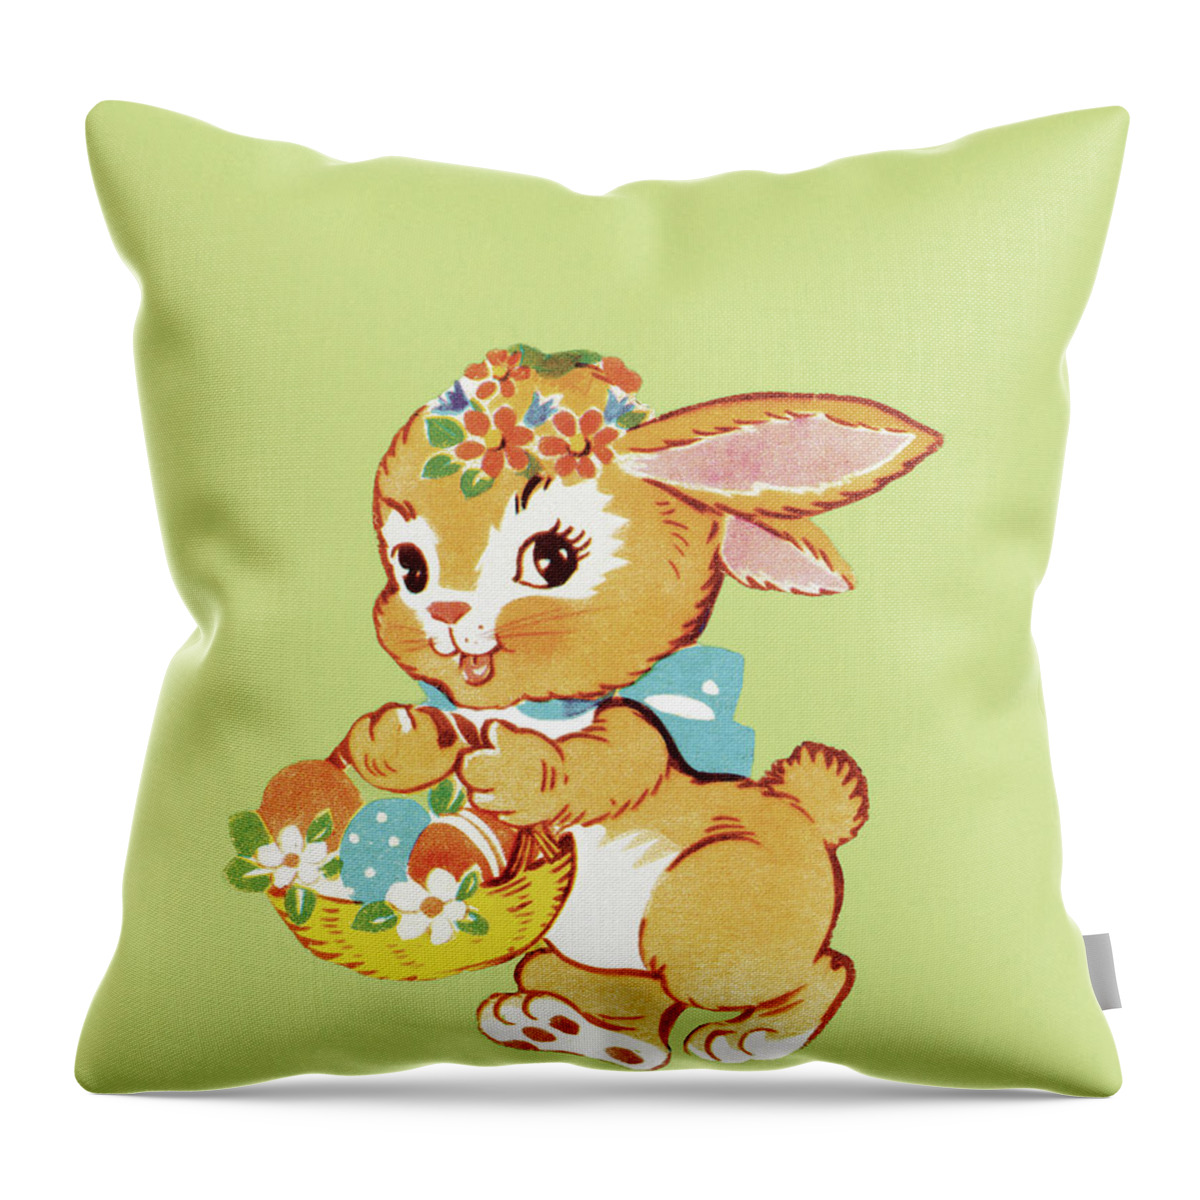 Animal Throw Pillow featuring the drawing Bunny Holding Basket by CSA Images